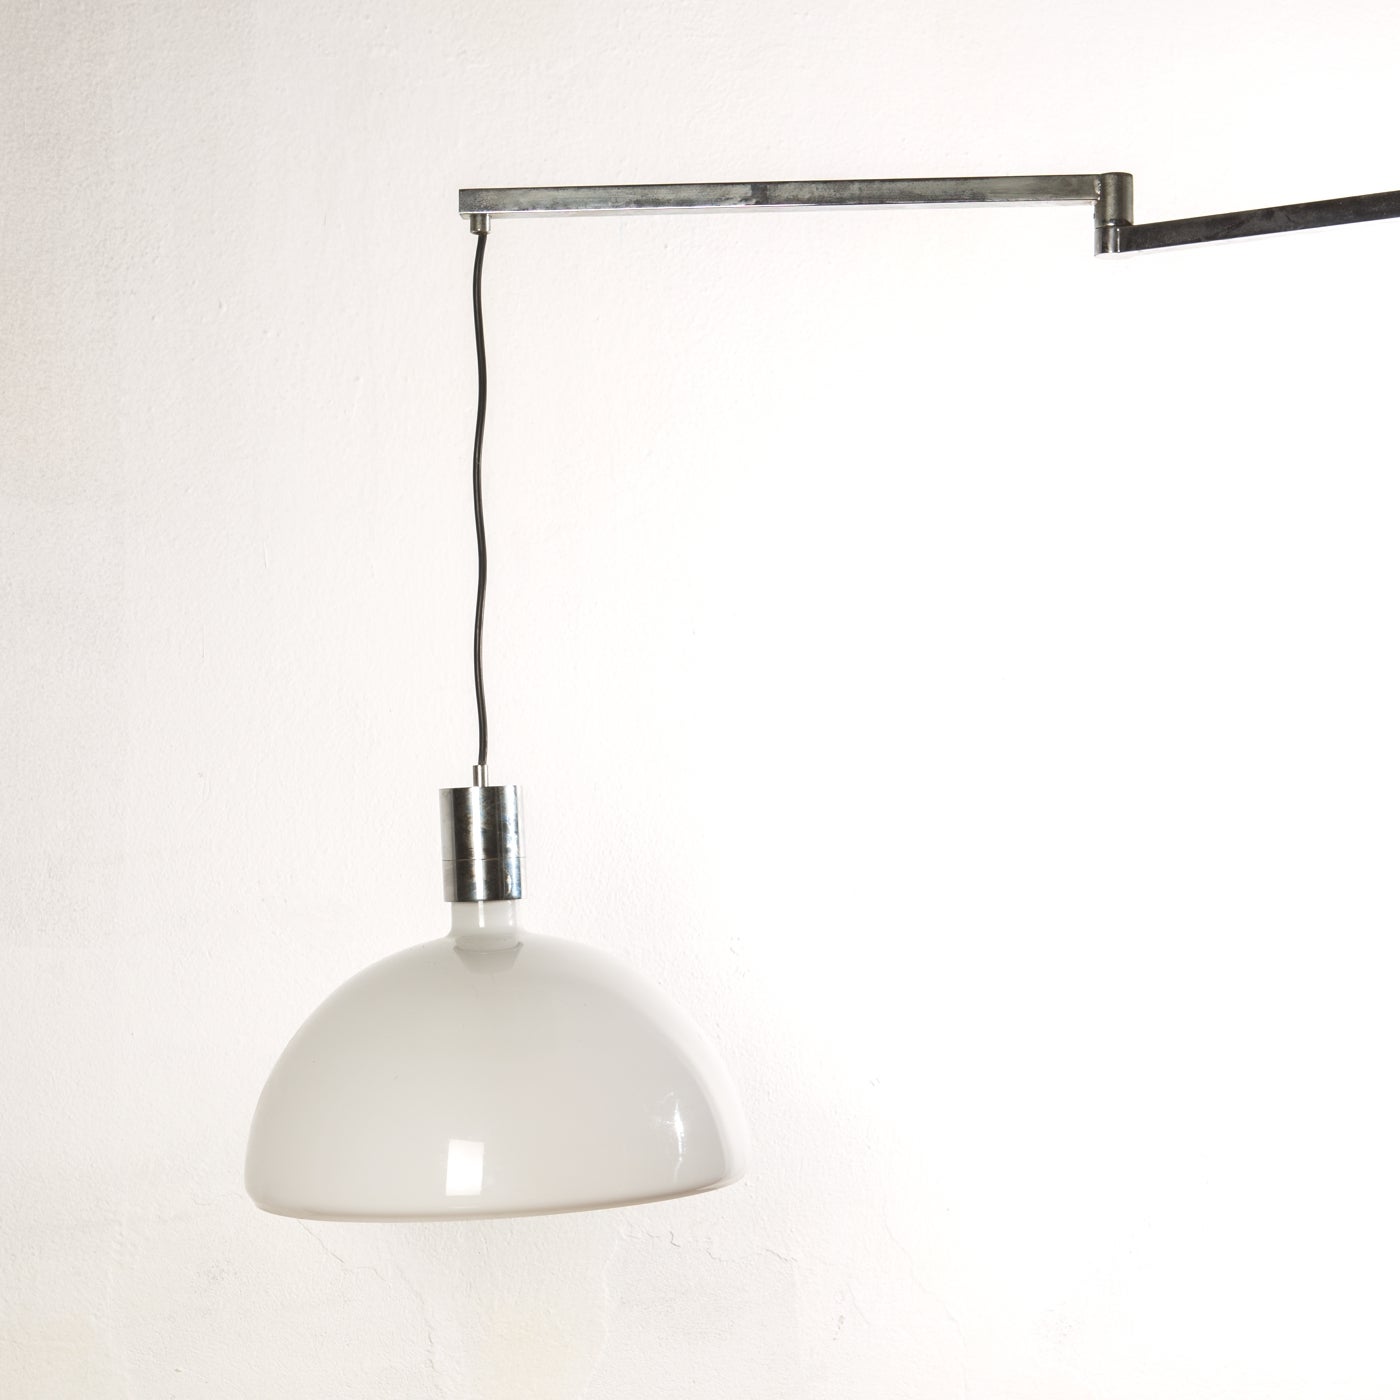 "AM/AS" Adjustable Ceiling Lamp by Albini, Helg and Piva for Sirrah, Italy, 1960